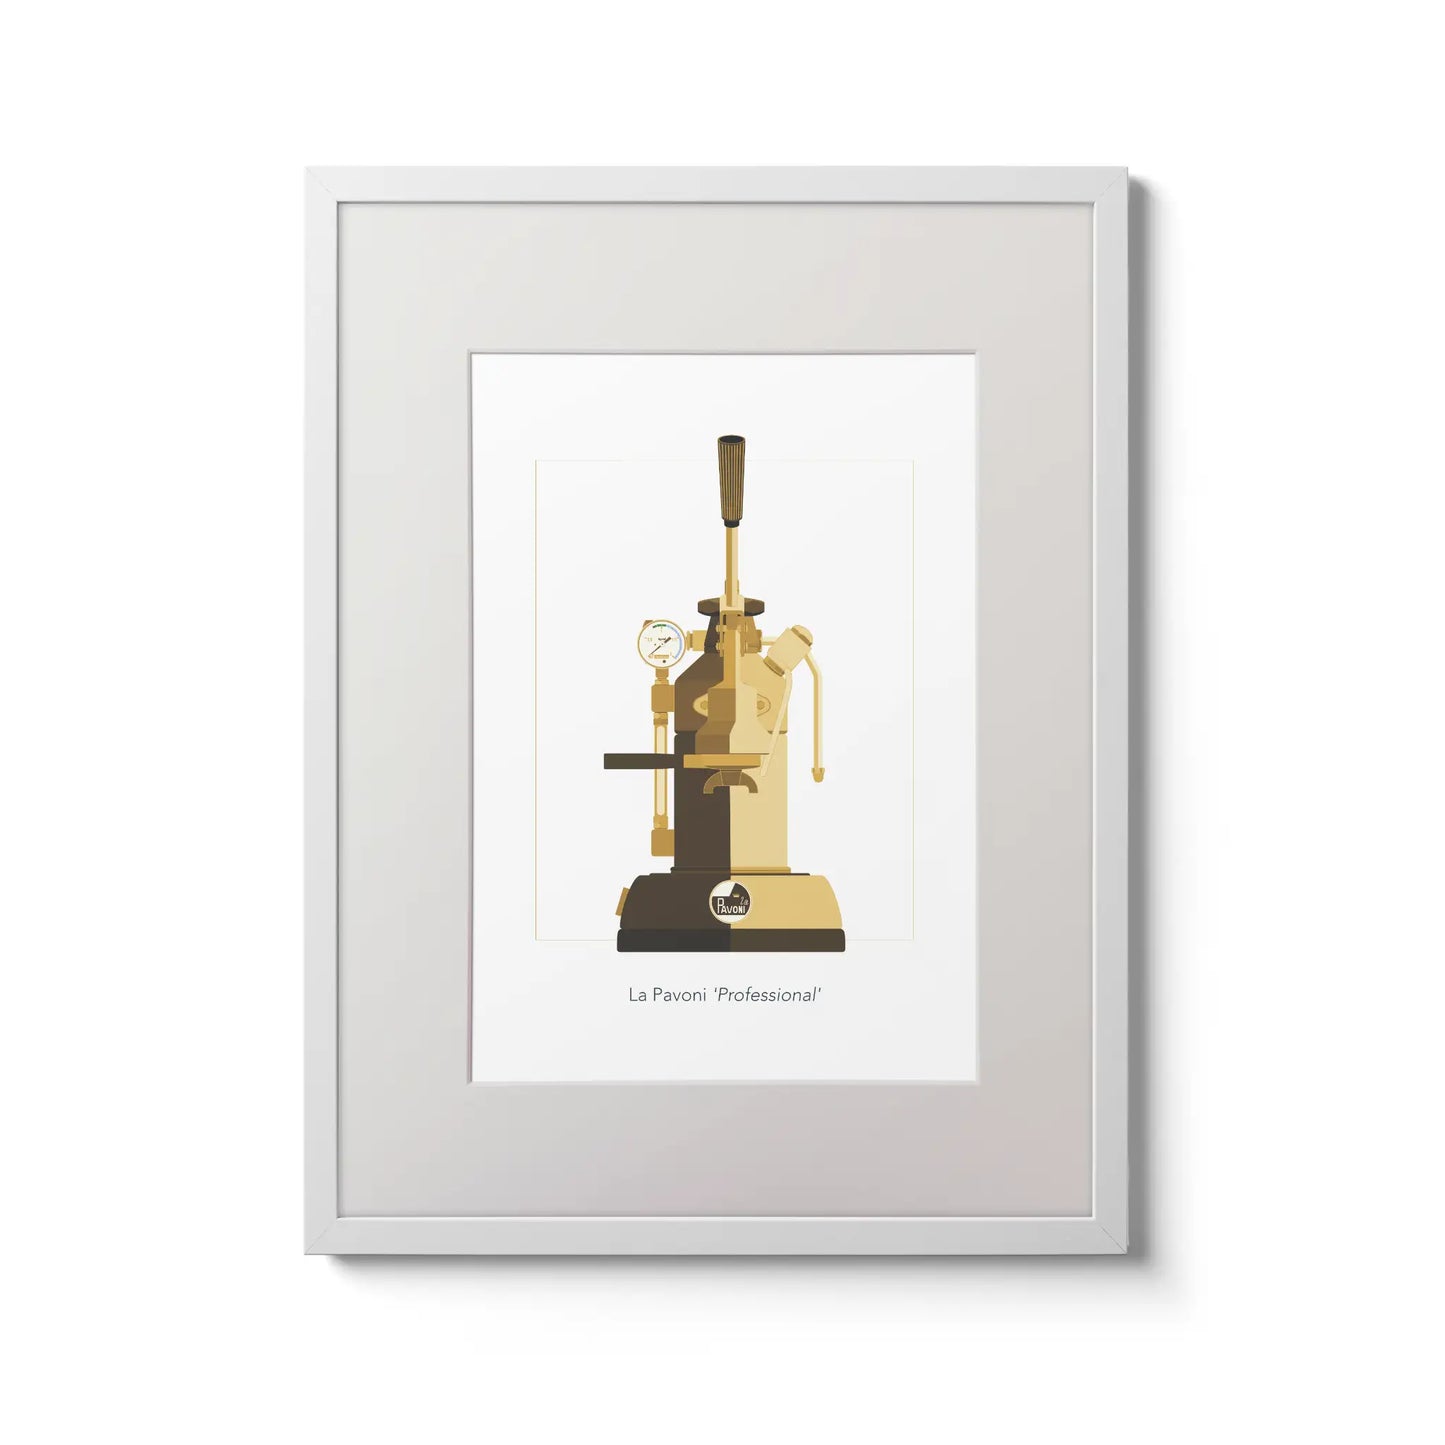 Framed illustrated wall art of a La Pavoni lever coffee machine, front view in mocha brown.